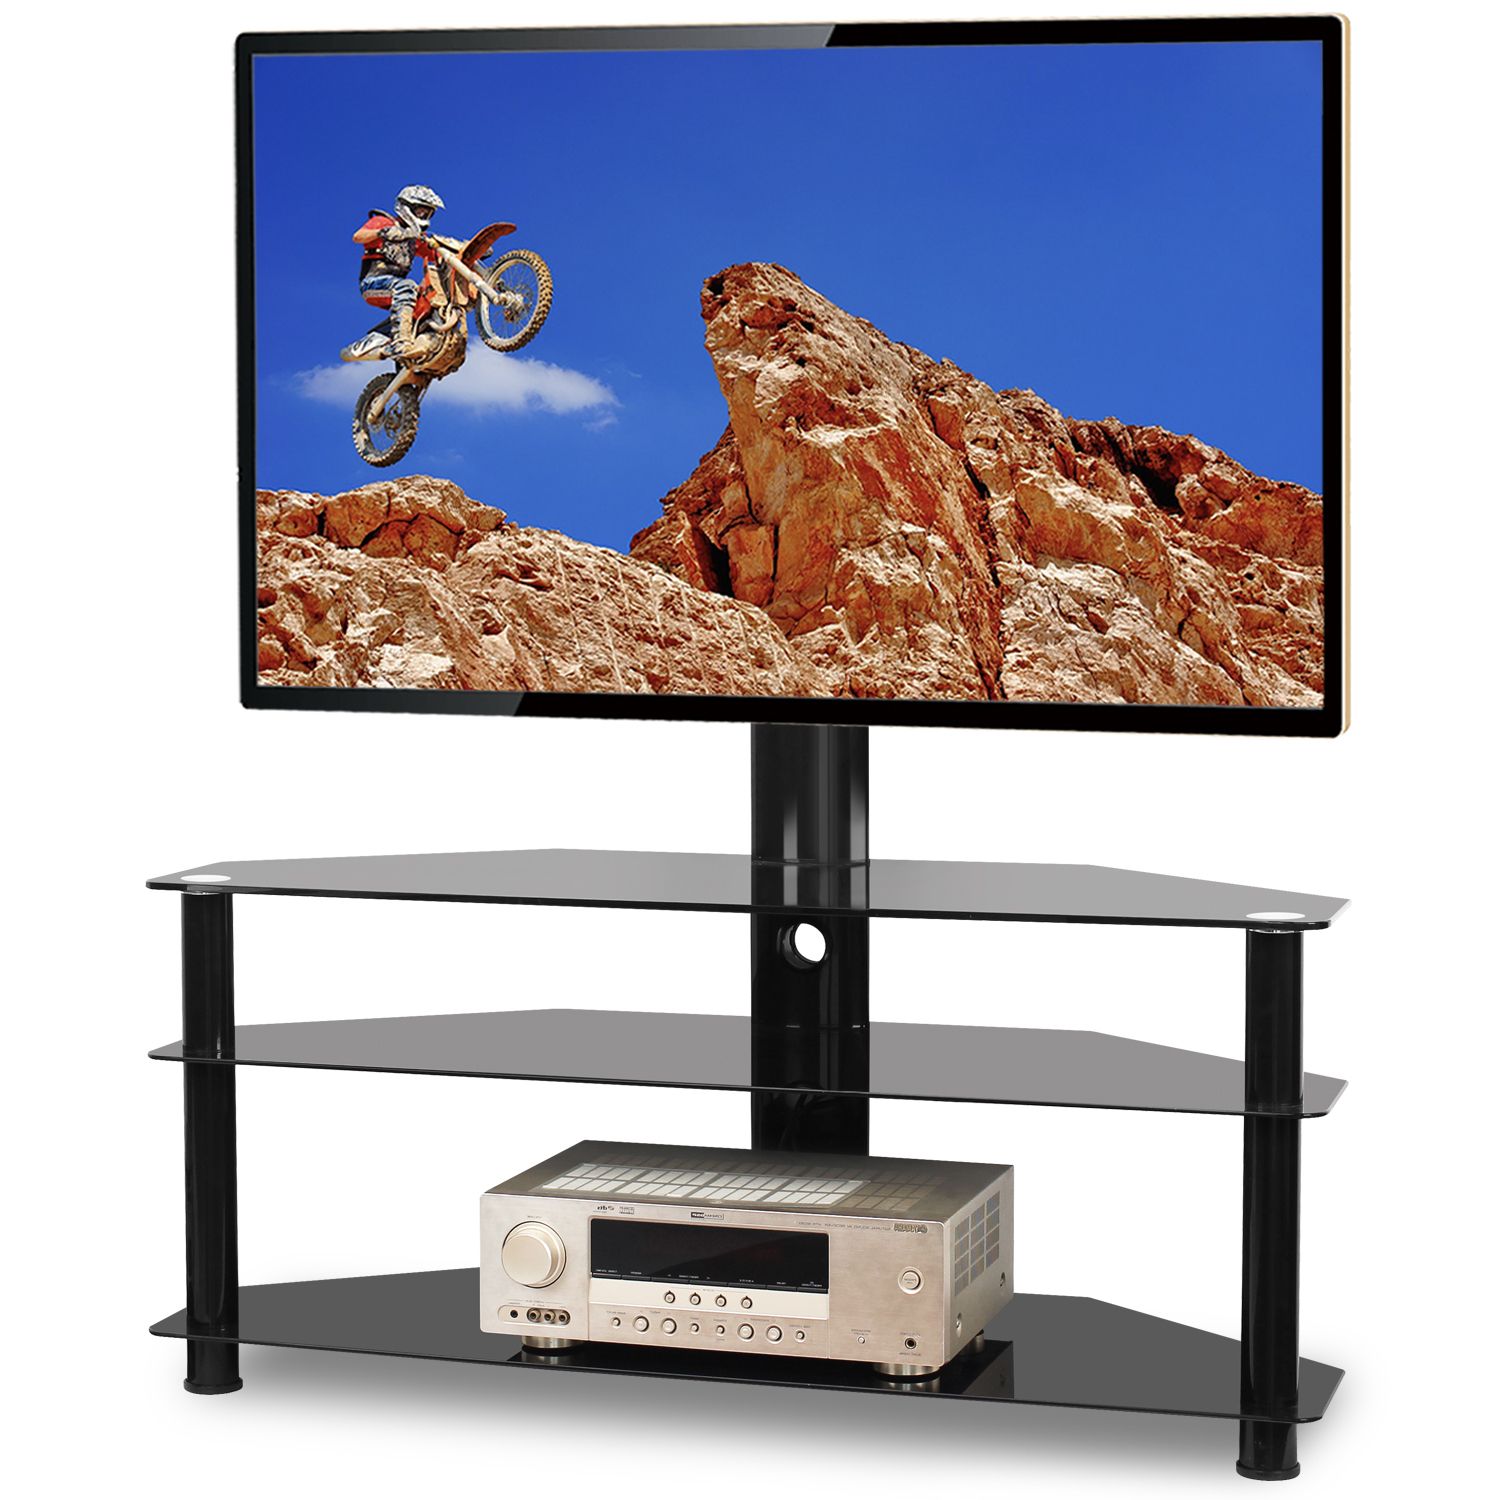 5rcom Floor Tv Stand With Swivel Mount For Flat Curved Pertaining To Leonid Tv Stands For Tvs Up To 50" (View 14 of 15)